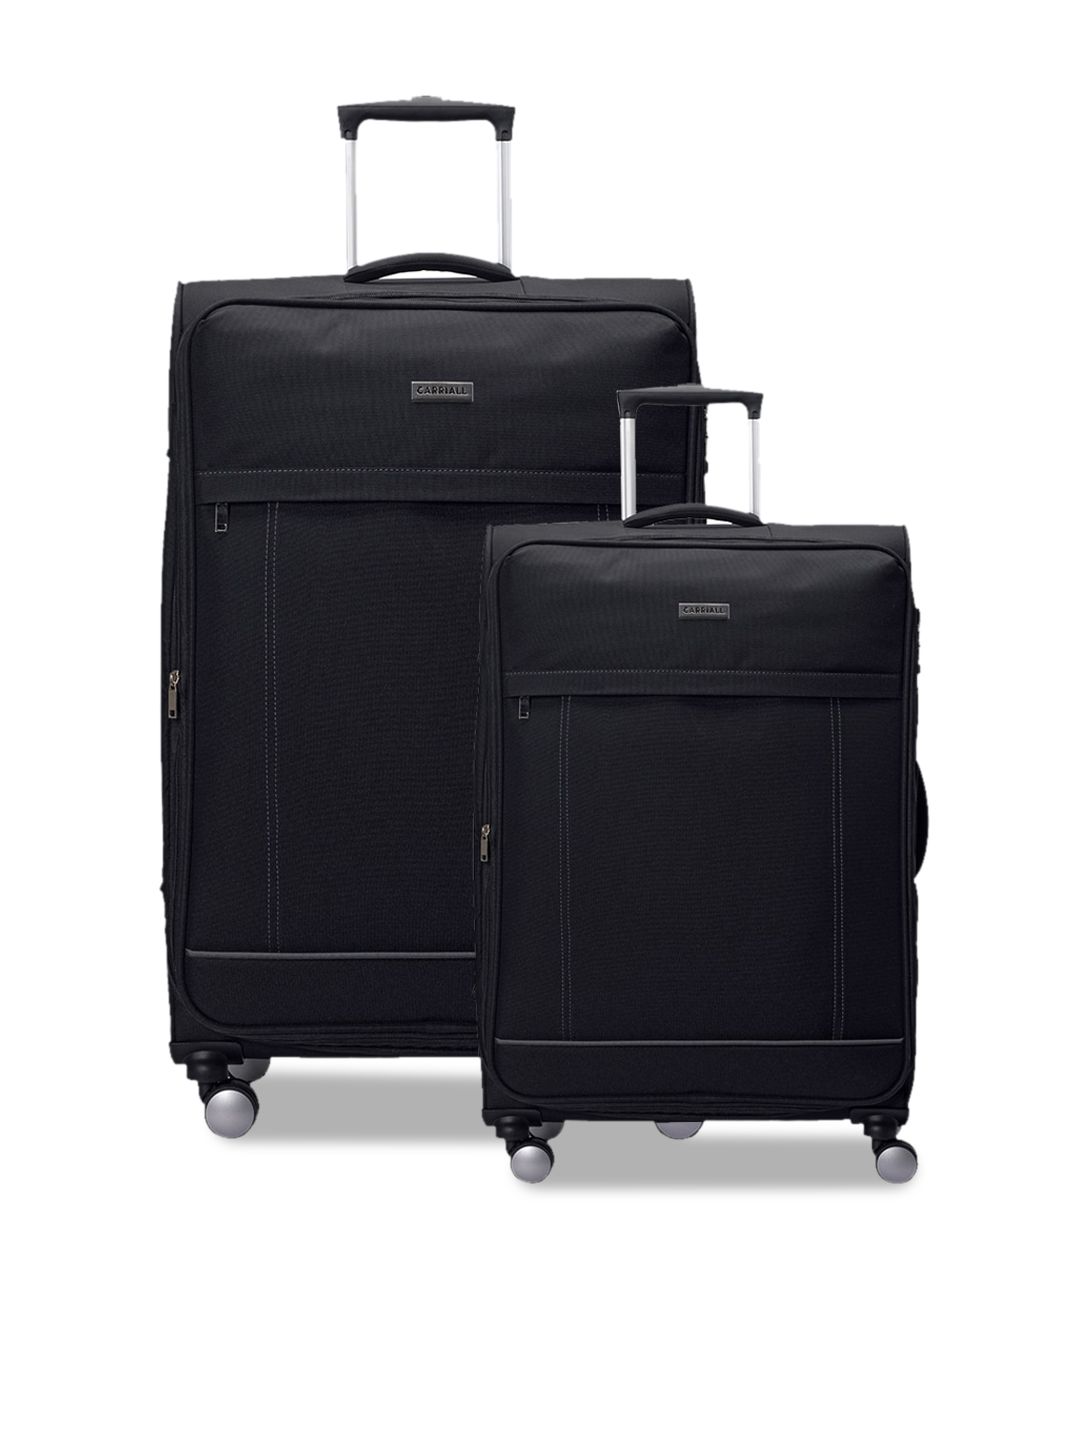 CARRIALL Set Of 2 Black Solid Soft-Sided Medium & Small Trolley Suitcases-24 inch &20 inch Price in India